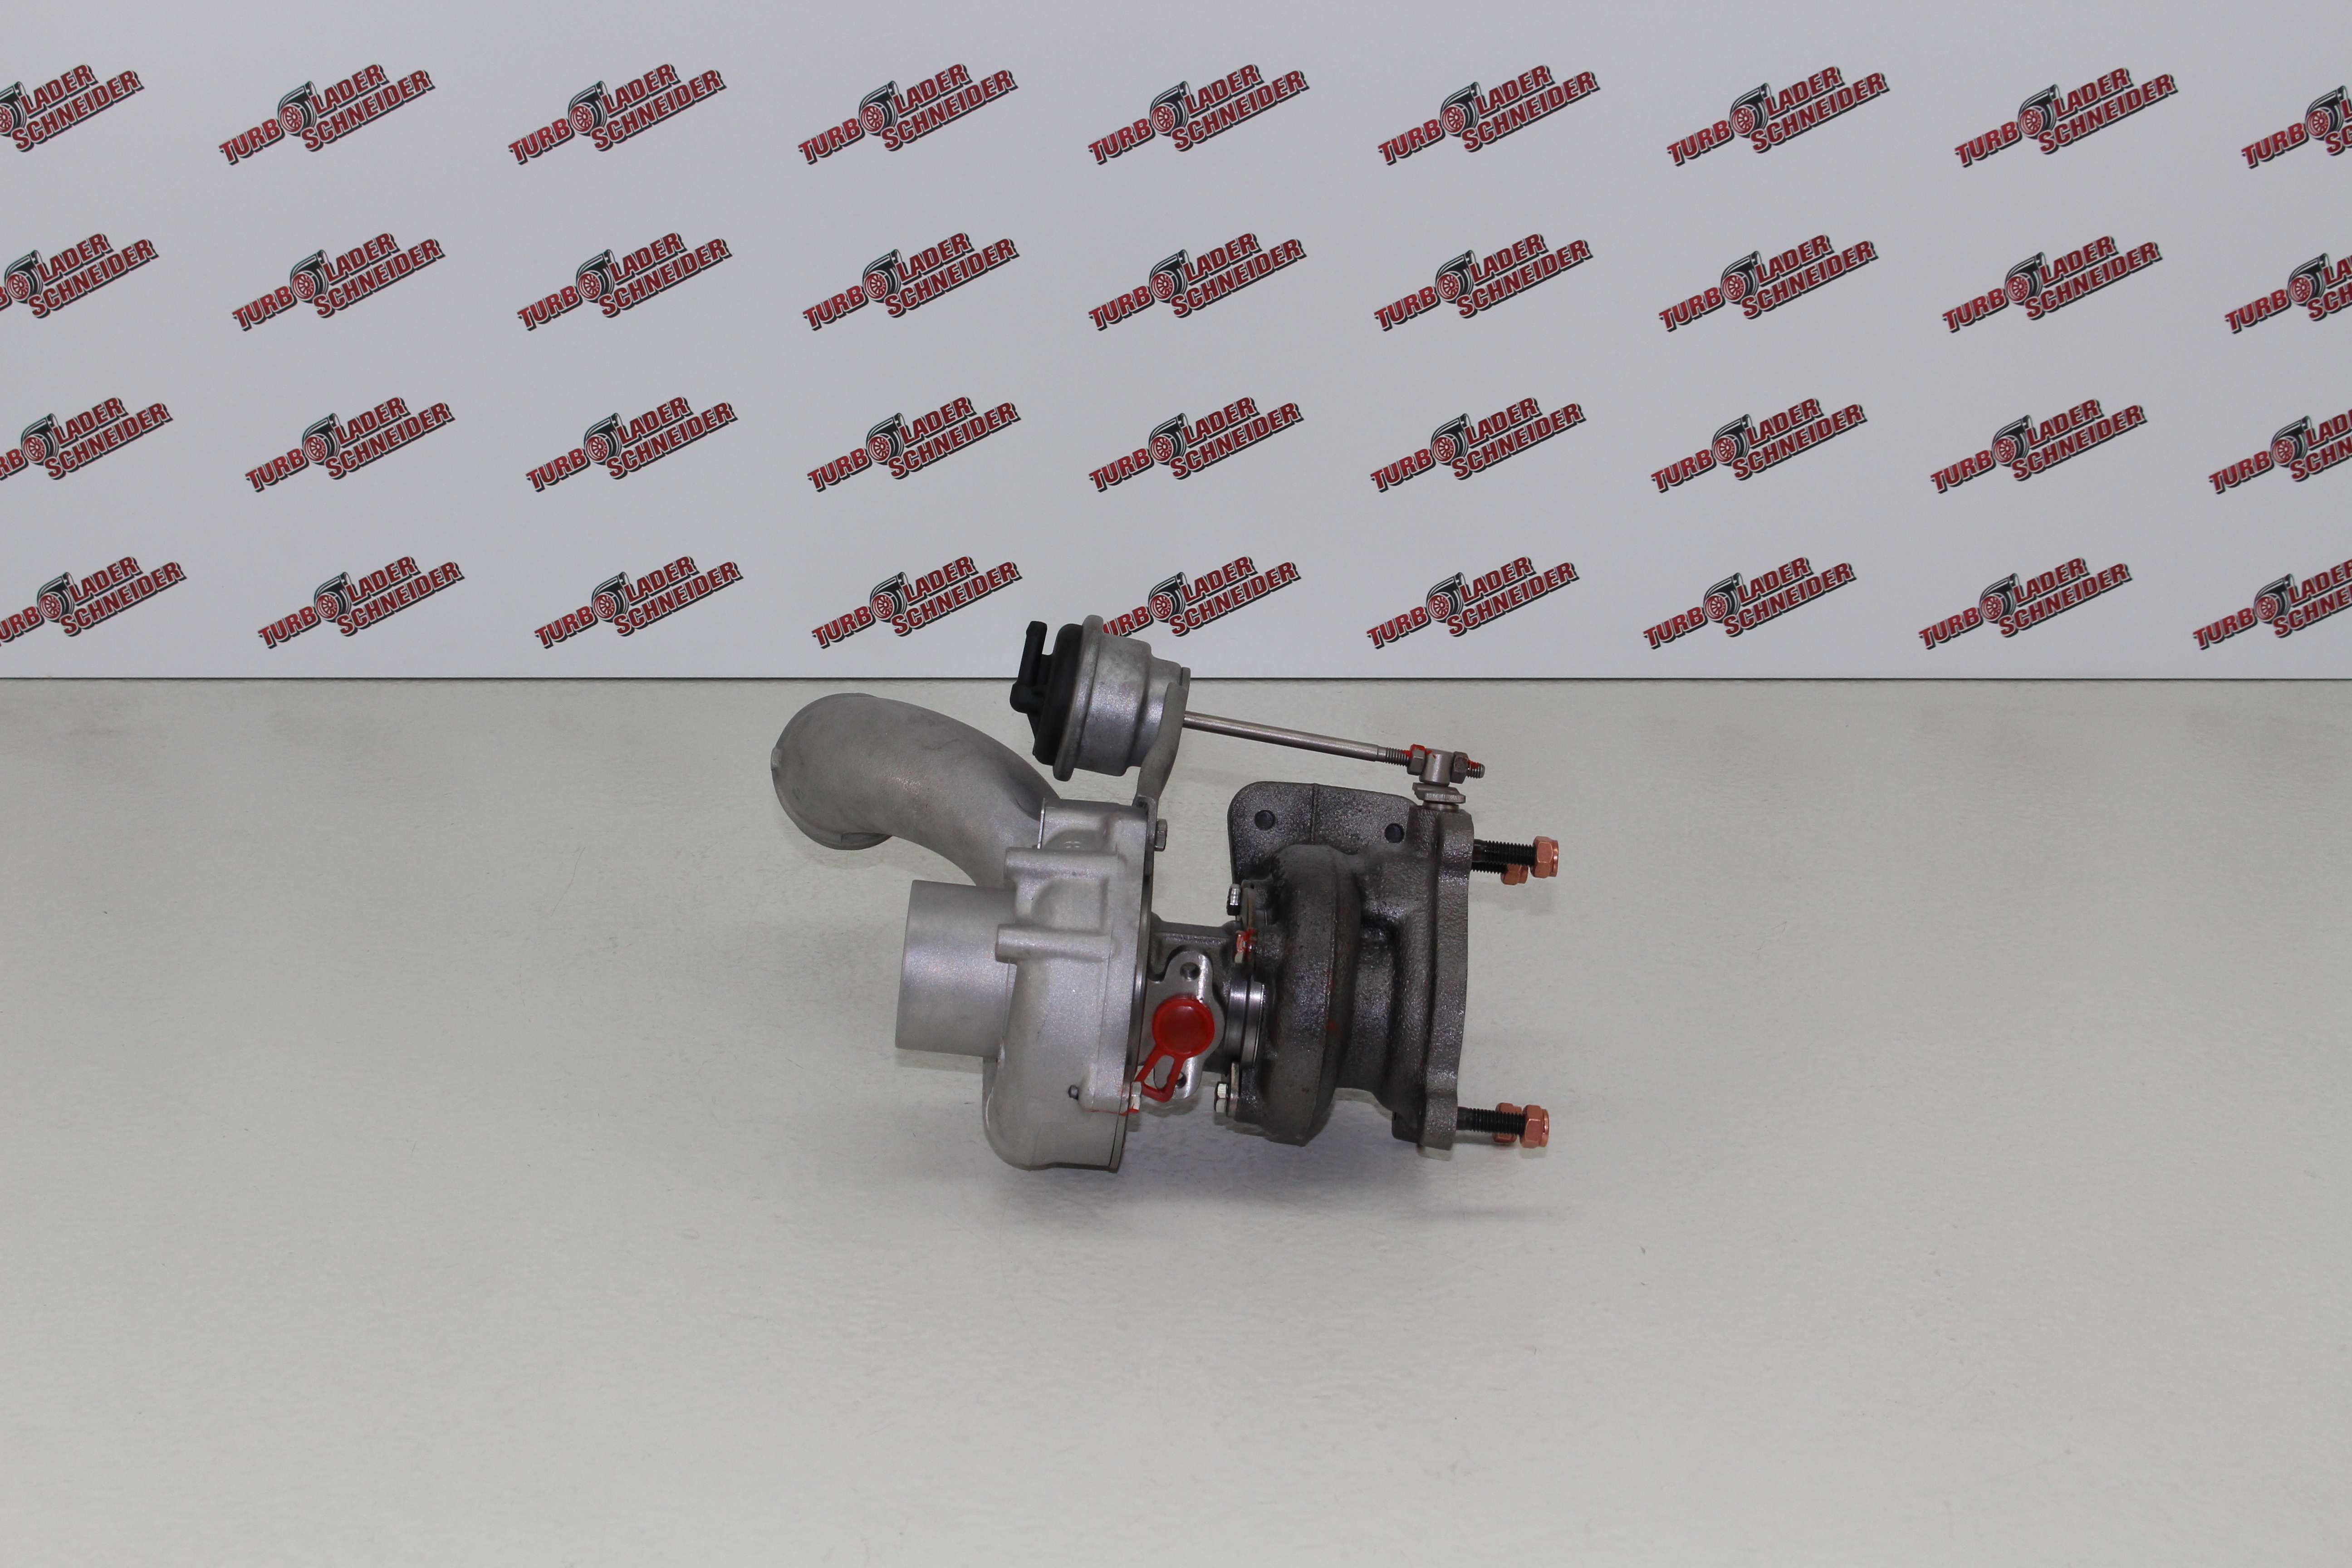 Turbolader Nissan/Opel/Renault 2.5 DCI/DTI/dCi 100-115 73-84 Kw